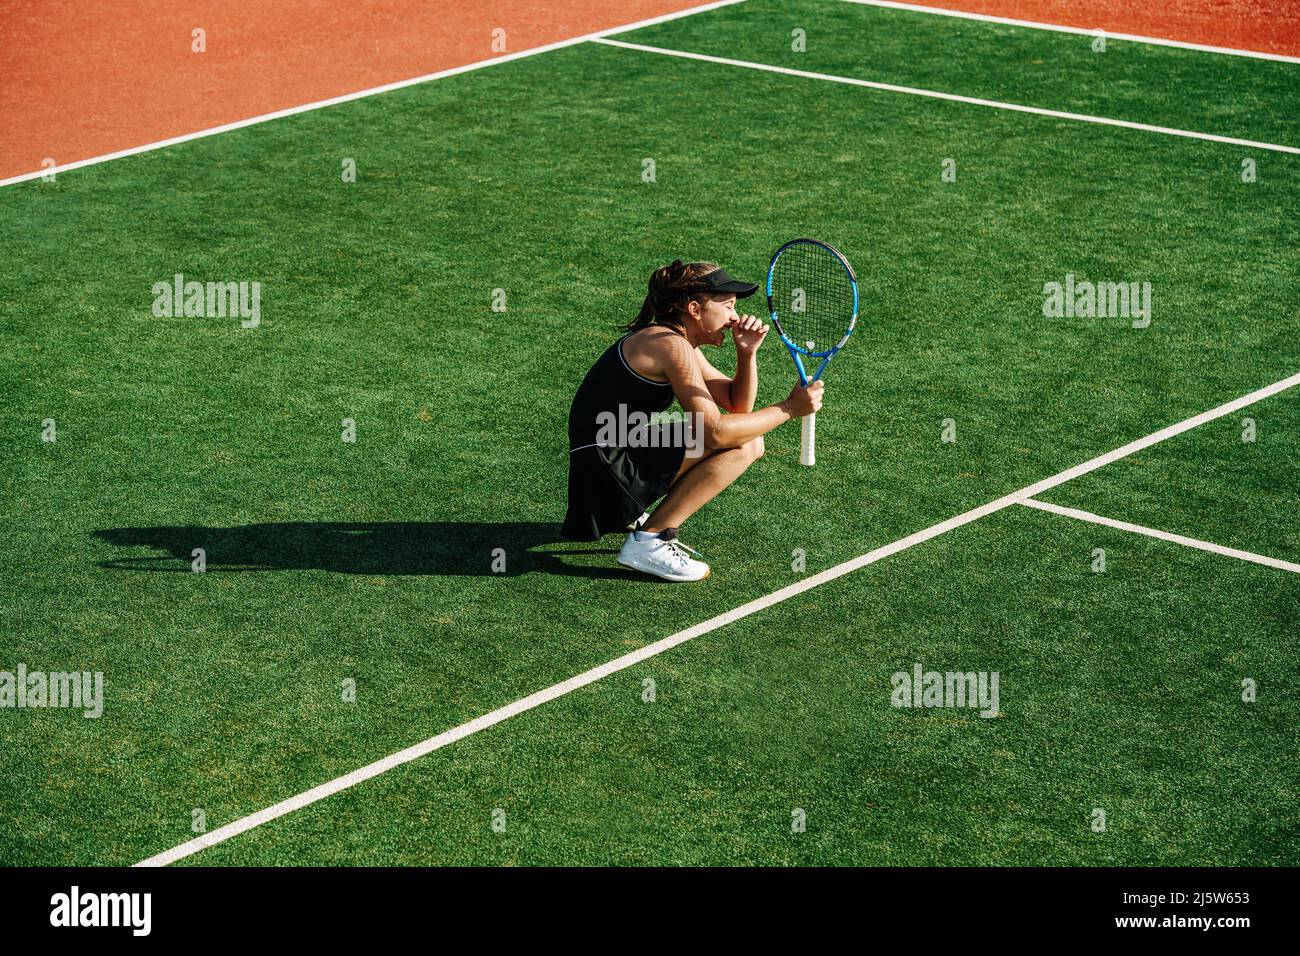 Crouched laughing girl during practice on a brand new outdoor tennis court. Vibrant green and brown with clear white lines. Stock Photo